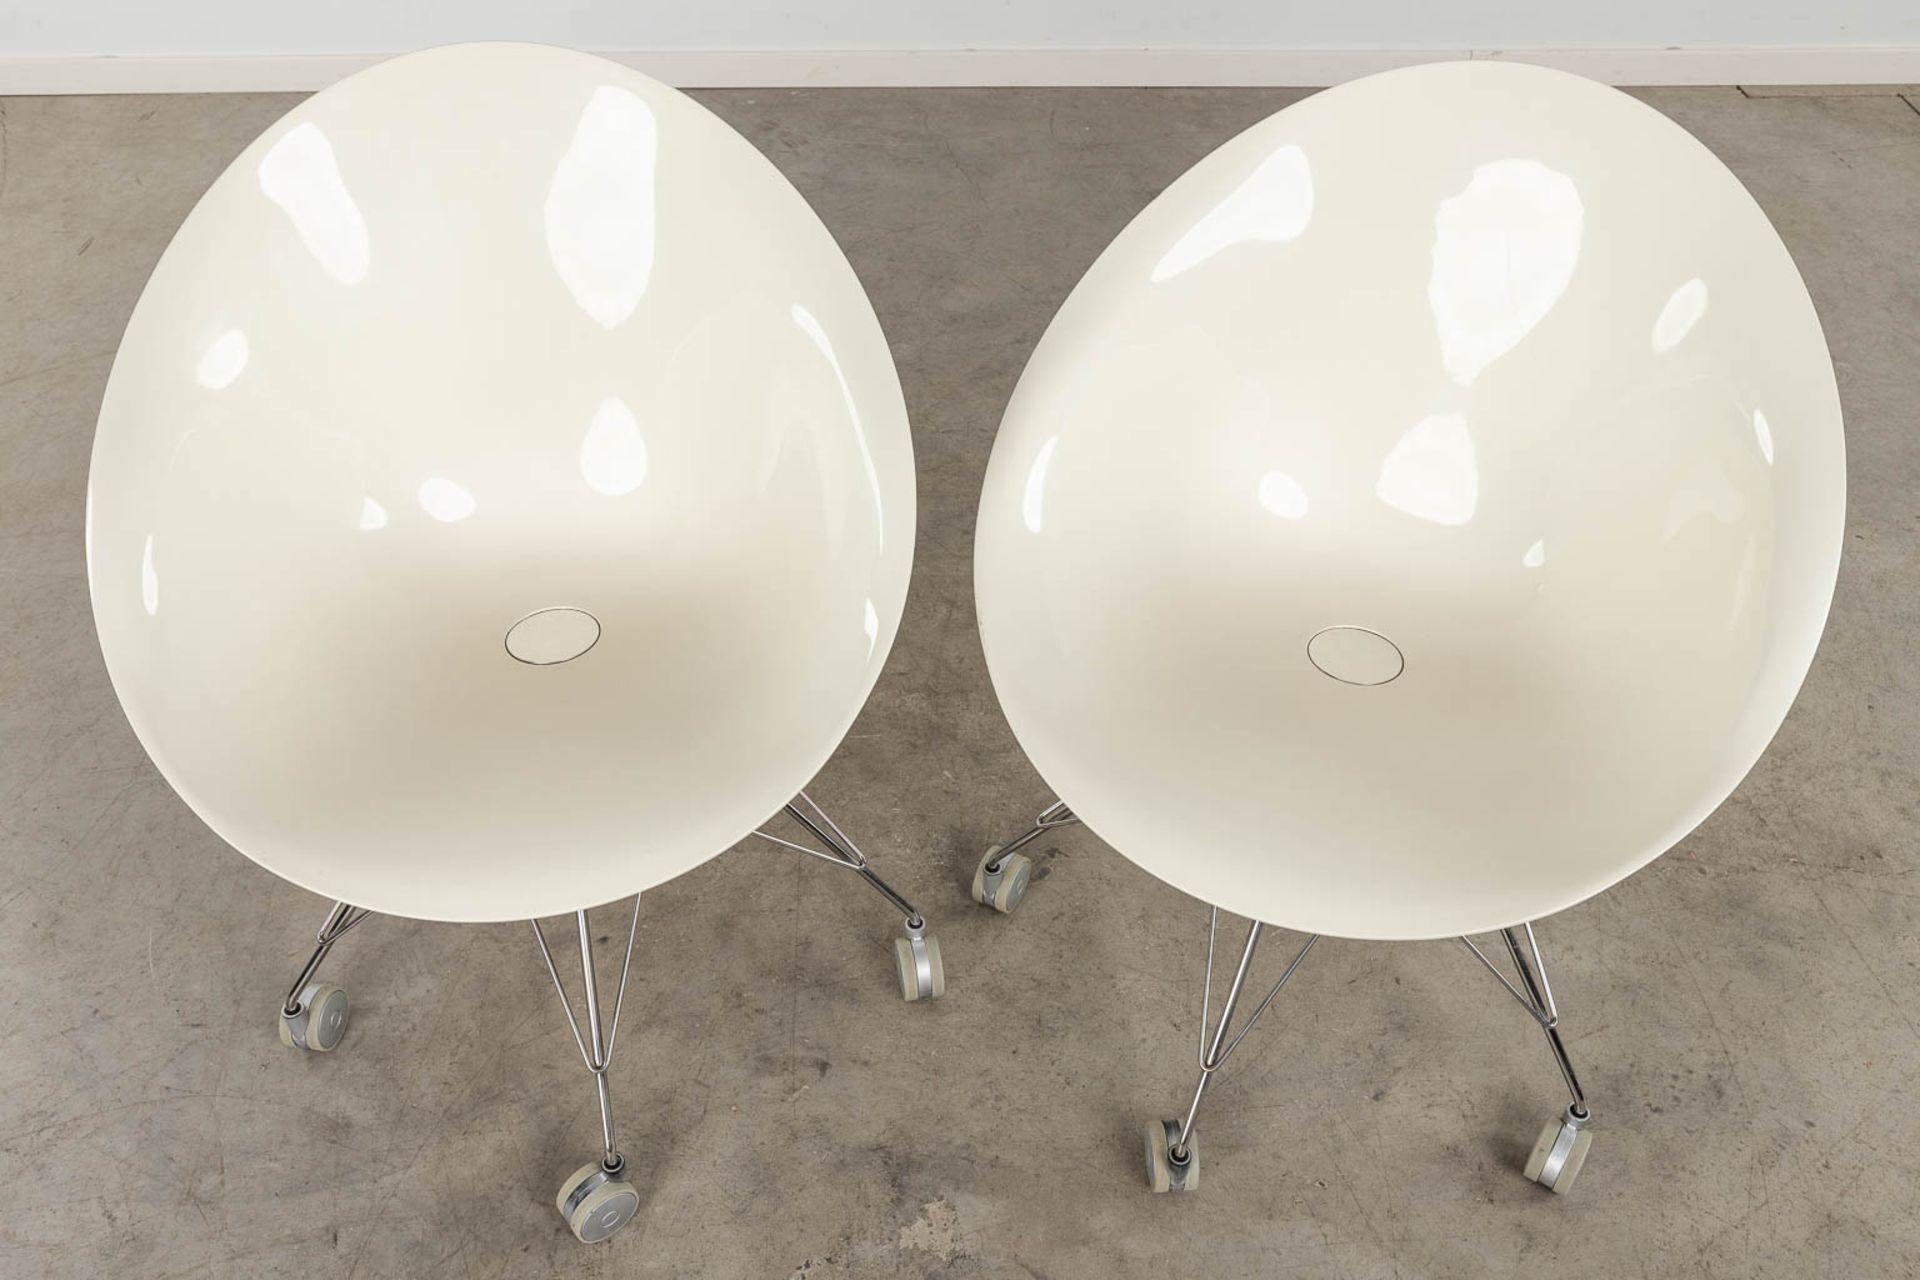 Philippe STARCK (1949) 'Ero' for Kartell, two office chairs. (D:59 x W:62 x H:82 cm) - Image 7 of 14